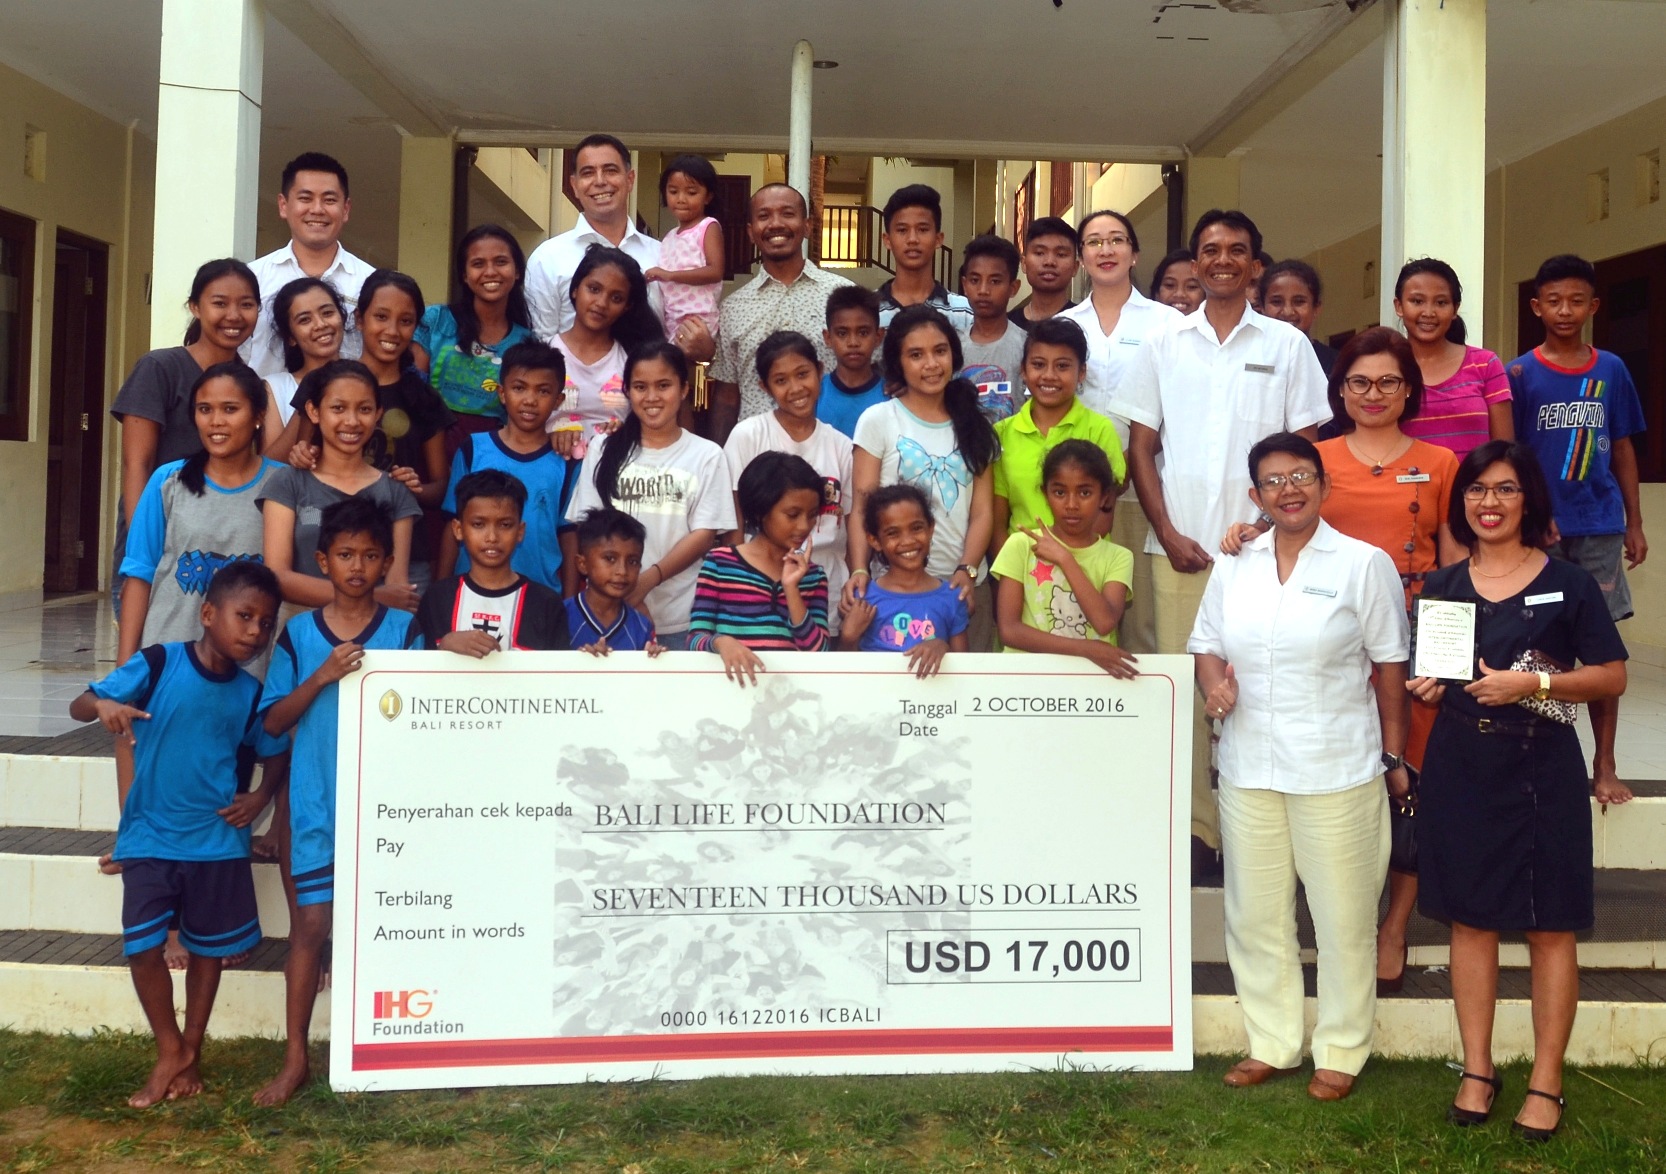 IHG® FOUNDATION GIVES BALI LIFE FOUNDATION A GRANT OF US$17,000 TO SUPPORT THE UNDERPRIVILEGED